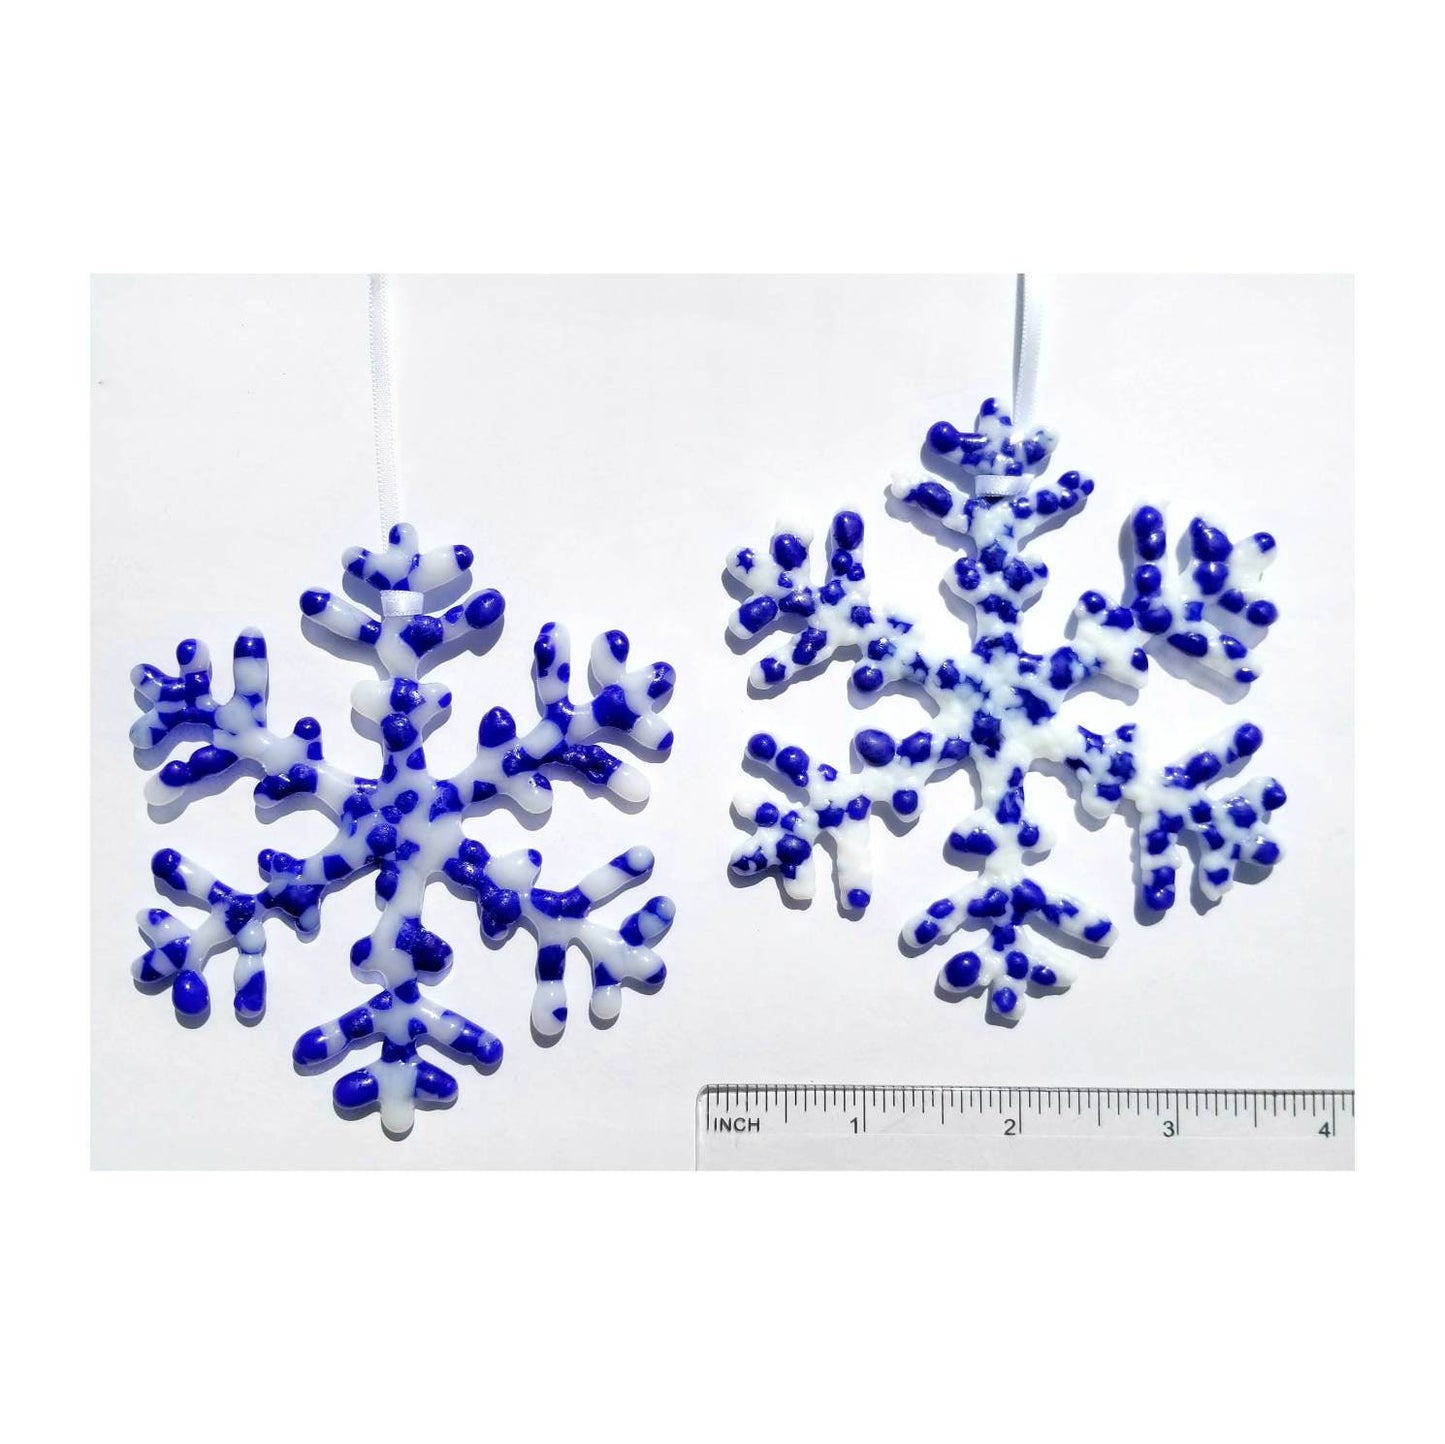 Winter Snowflake, Kiln Fused Glass. Cobalt Blue & White Ornament. A pretty Christmas gift, includes clear padded box. Hanauka holiday.